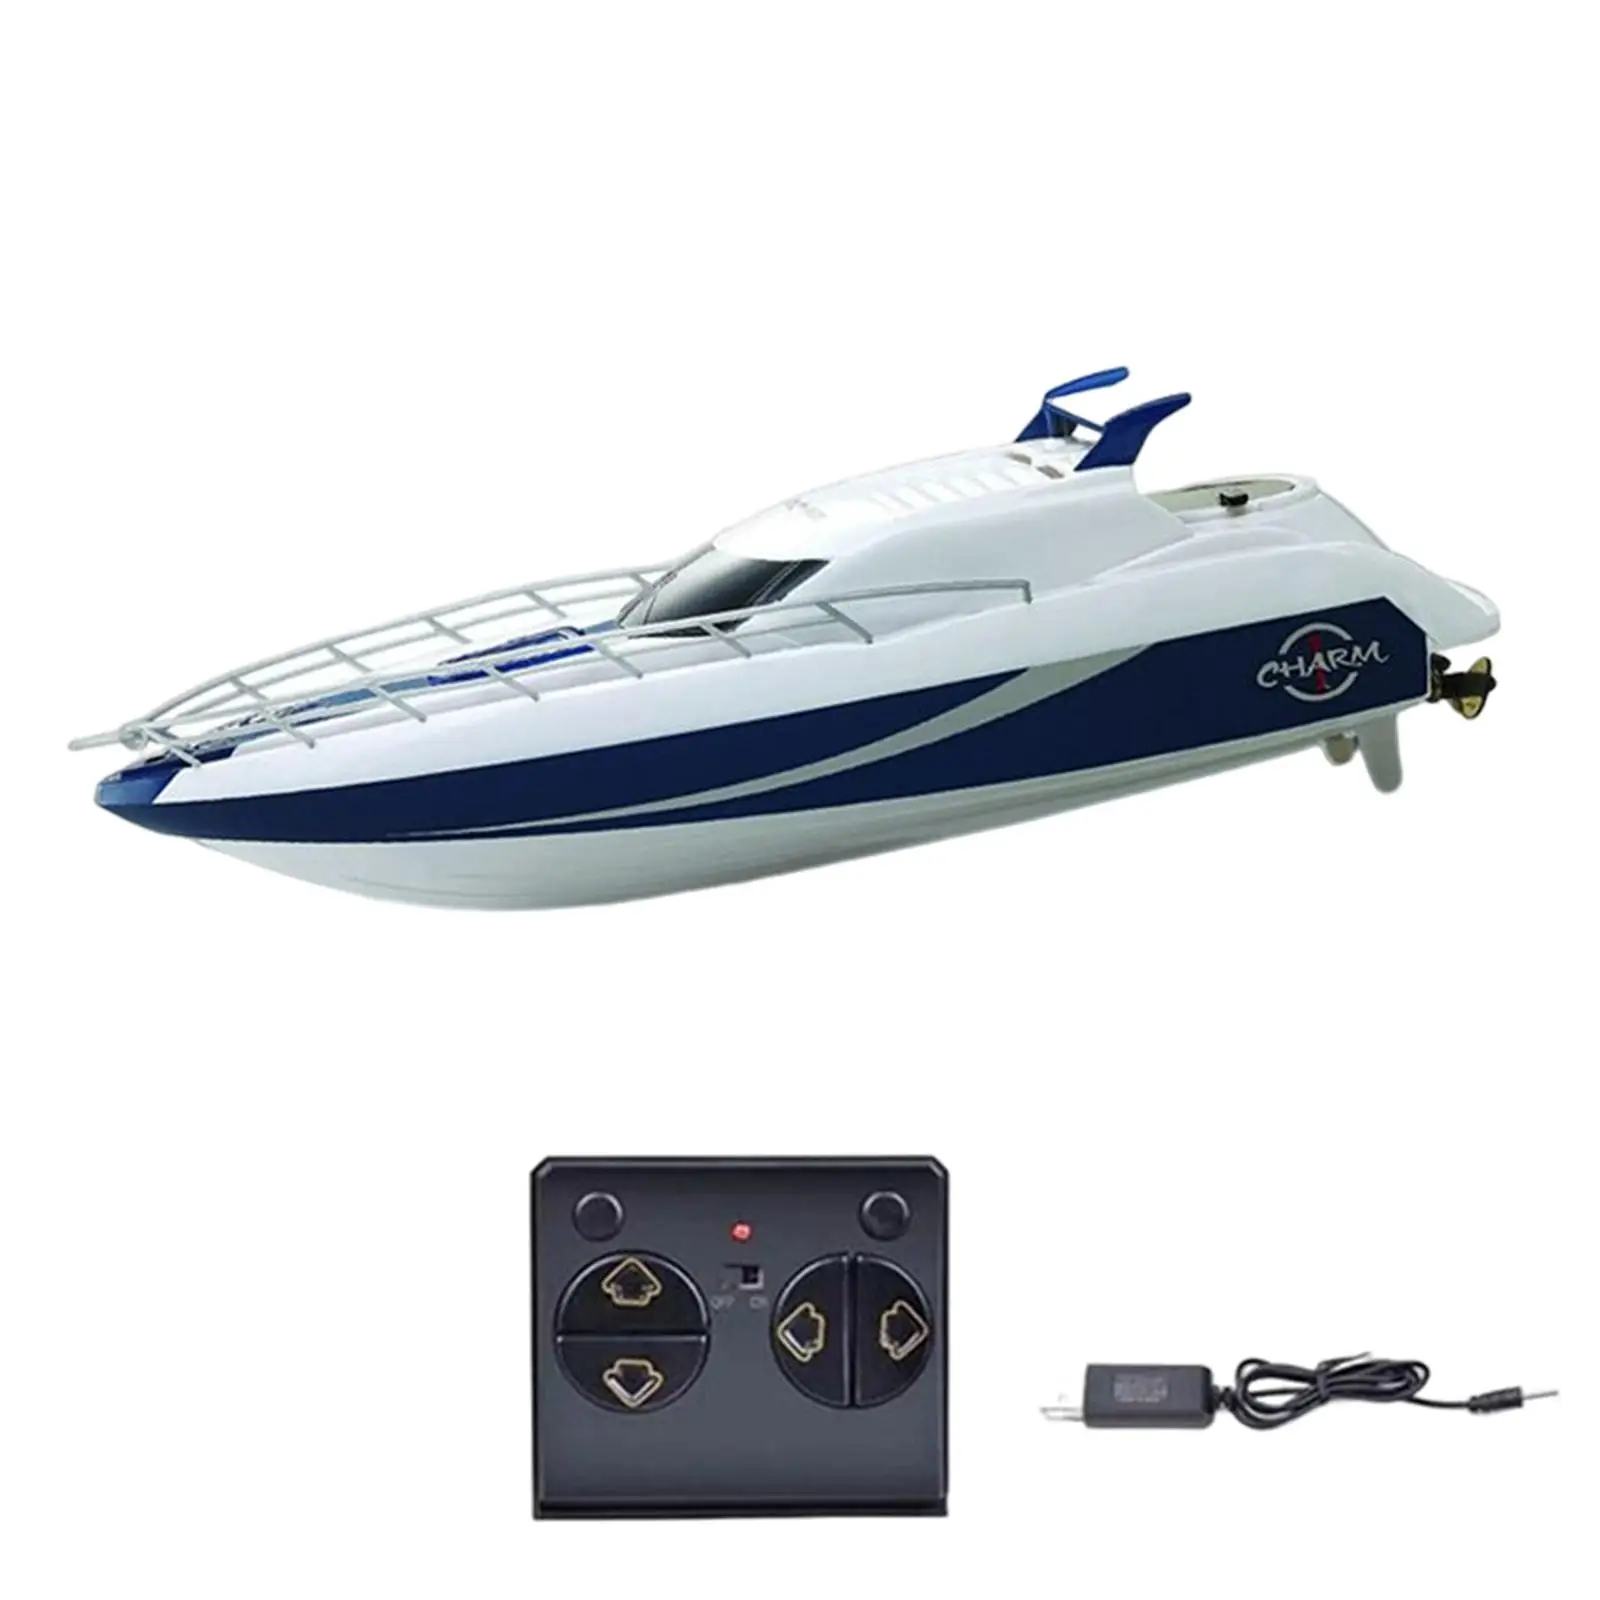 Portable Remote Control Boat Toy Water Toy Boat USB Rechargeable Warship Model RC Boat for Kids Adults Children Boys Gifts